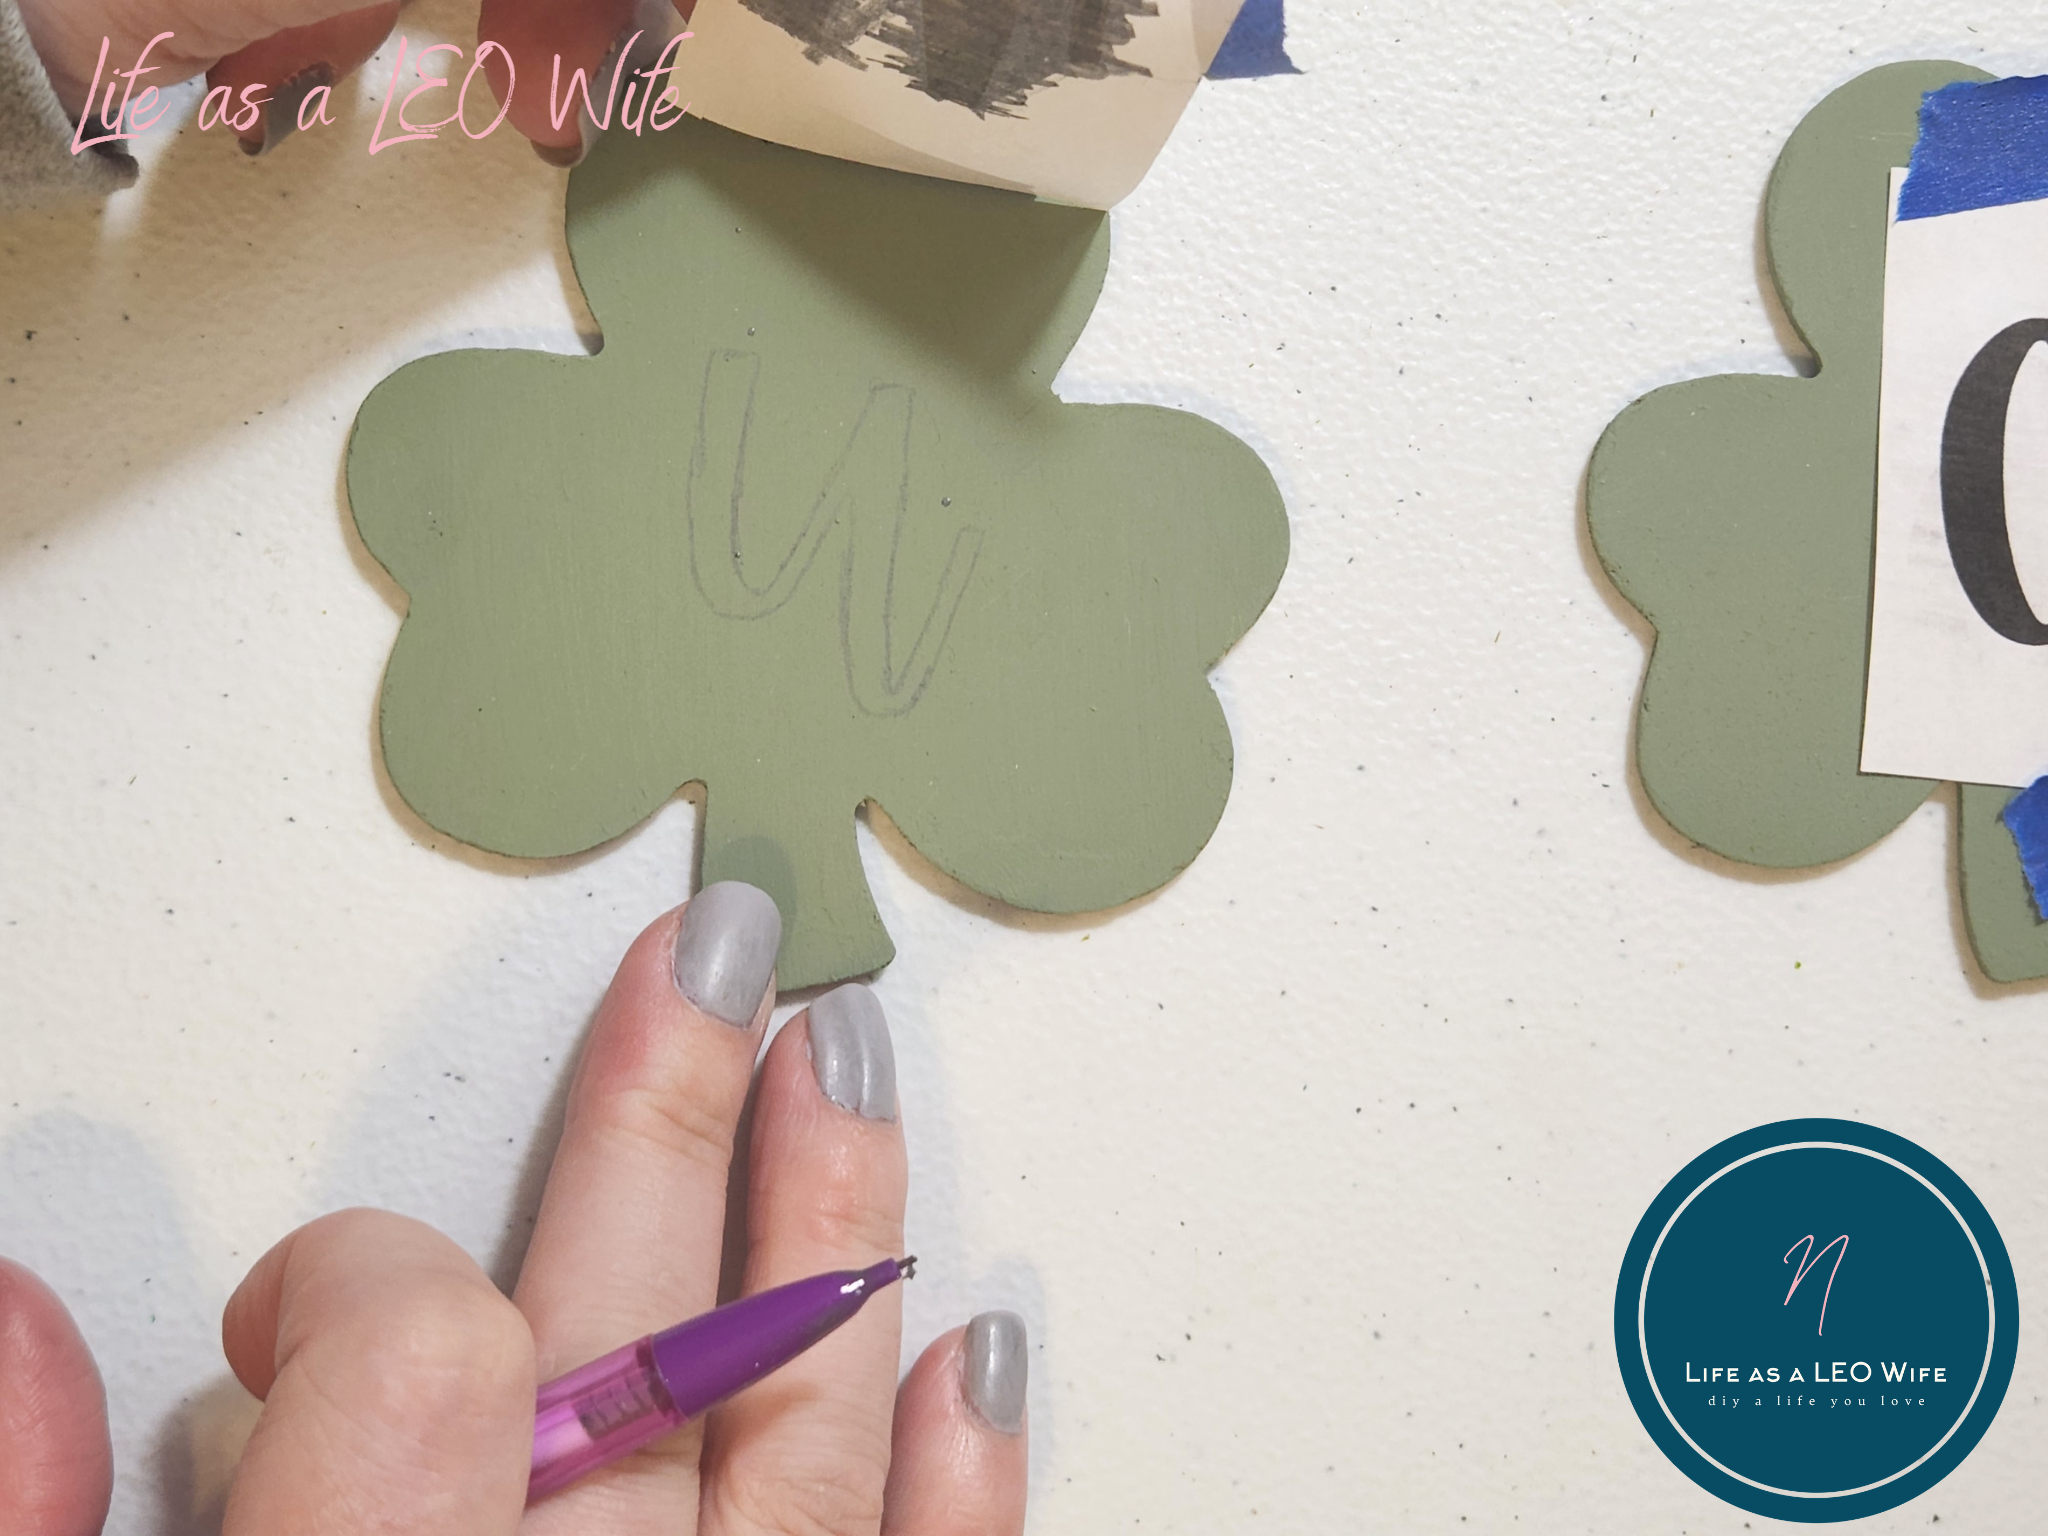 Lifting the paper with the letter "u" up from the shamrock ensuring that the pencil outline of the letter is on it.